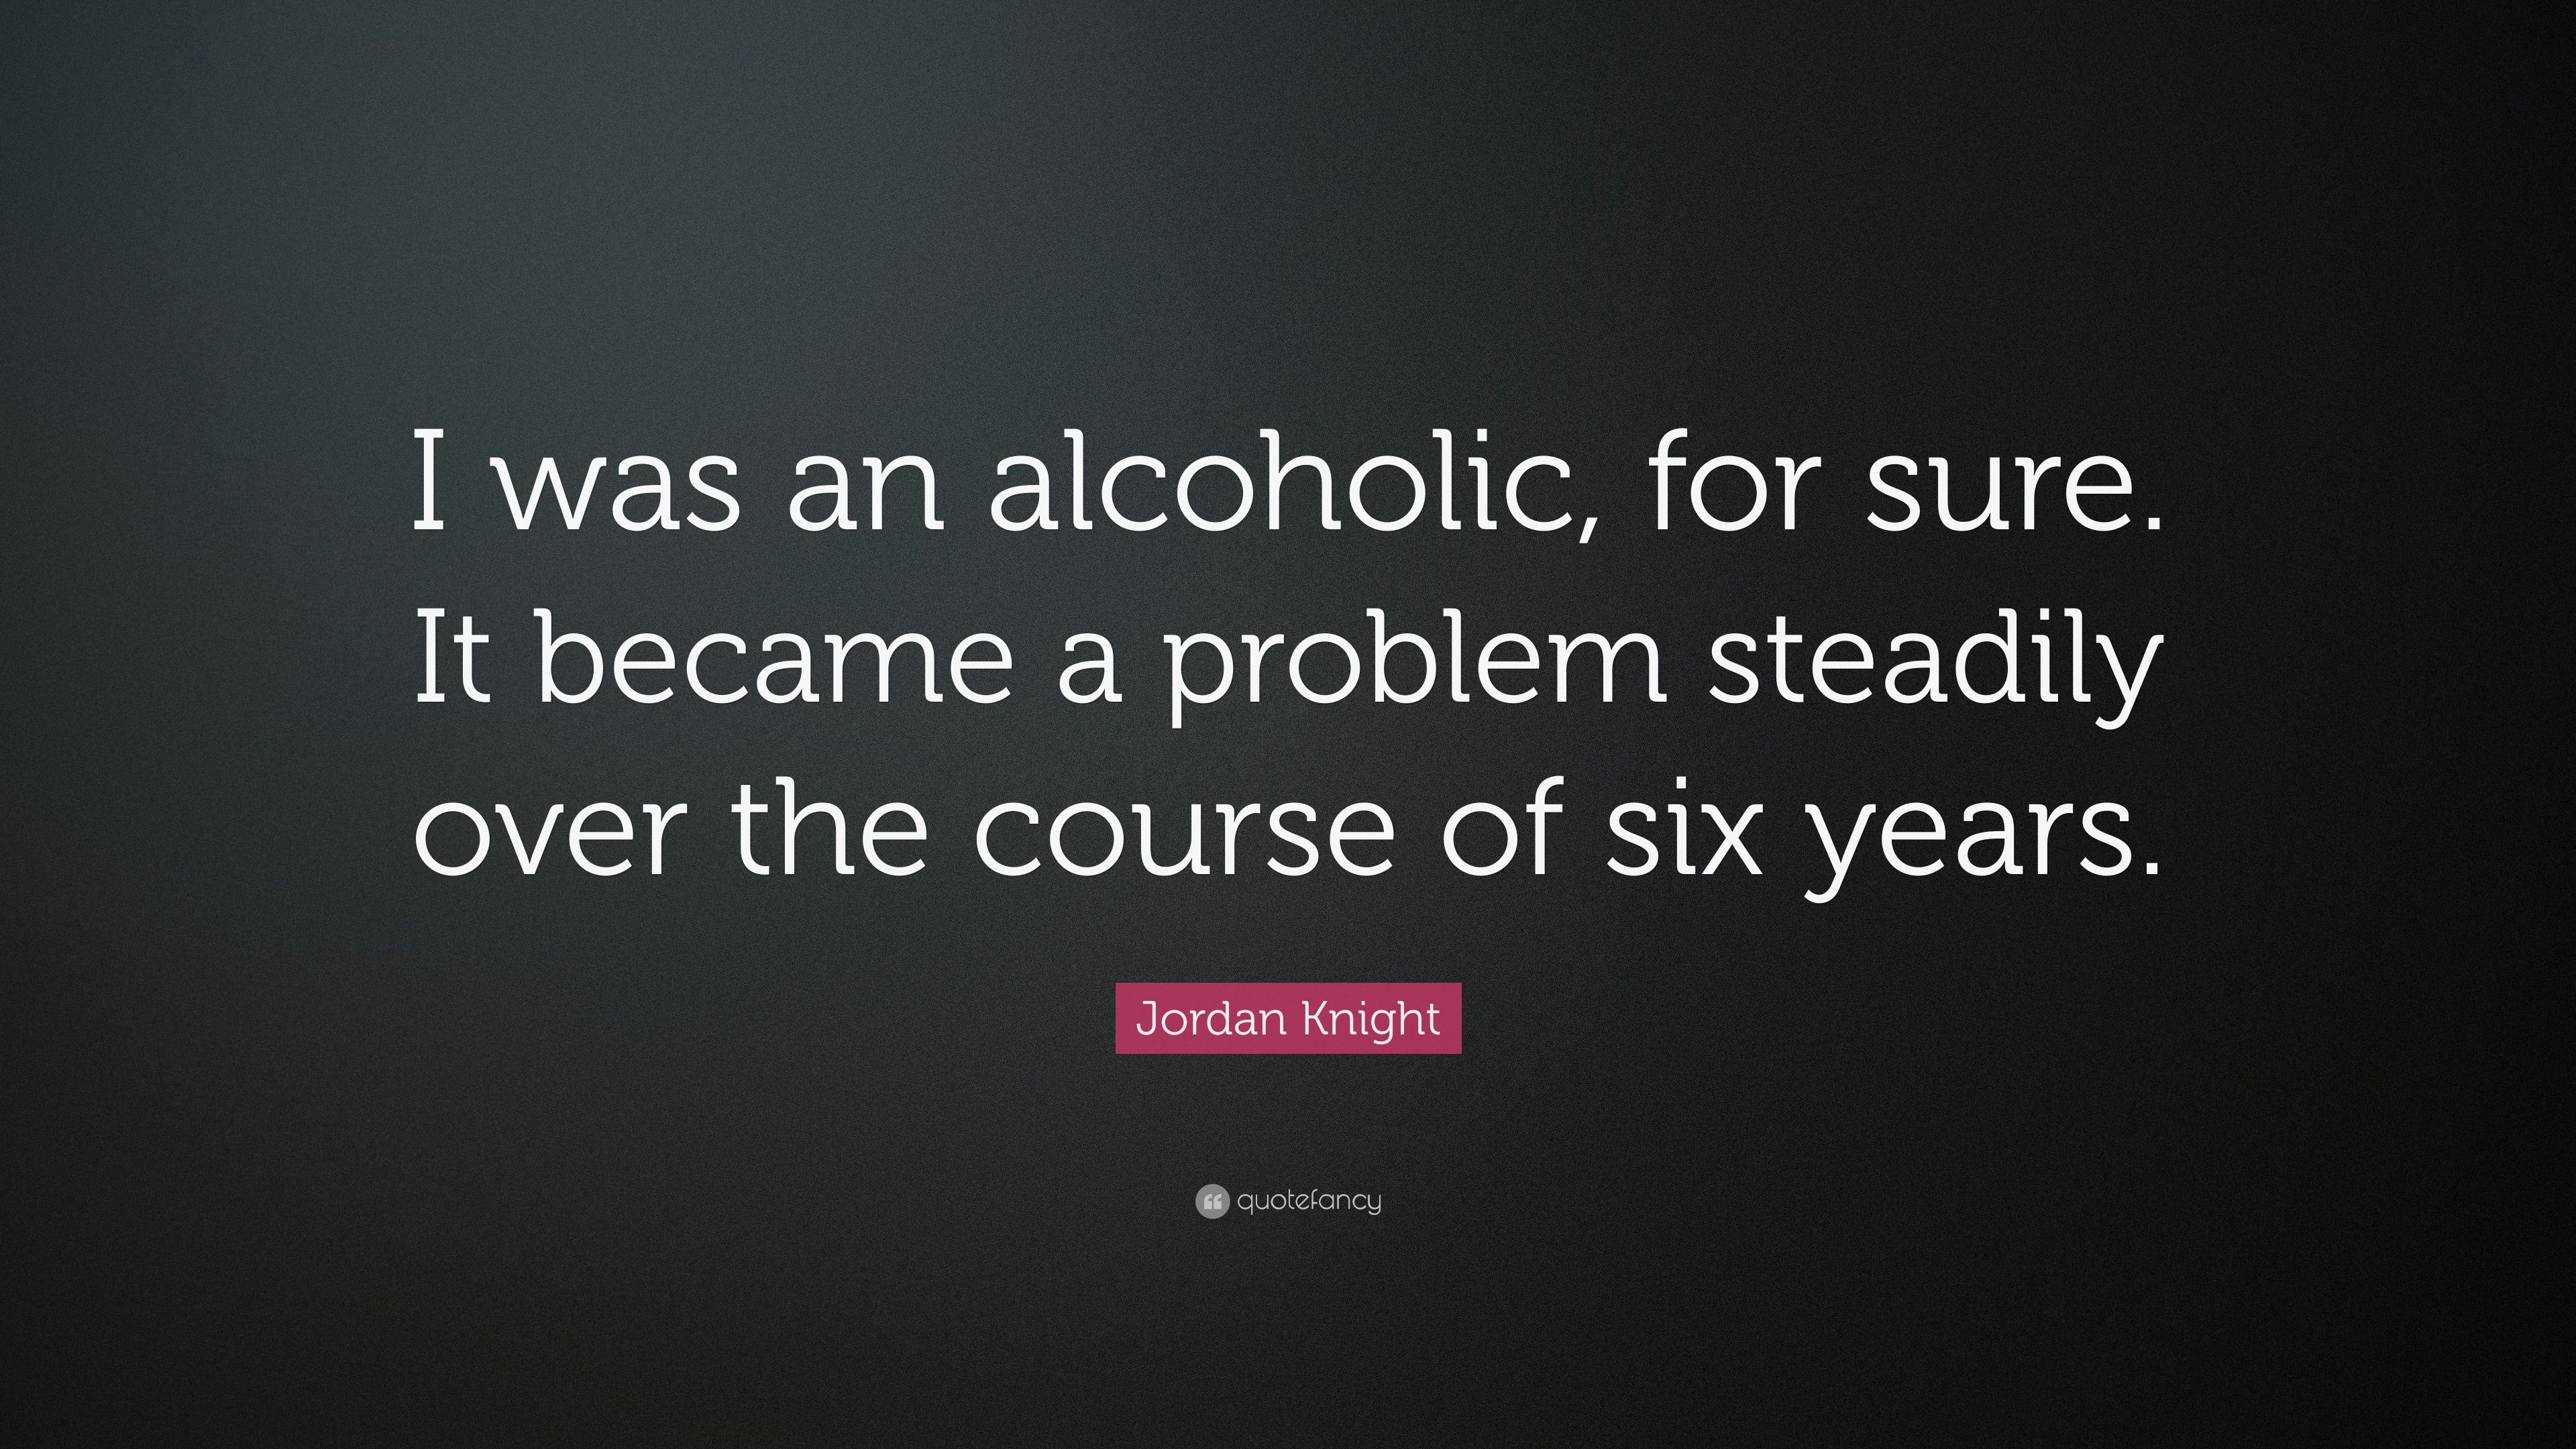 Jordan Knight Quote: “I was an alcoholic, for sure. It became a